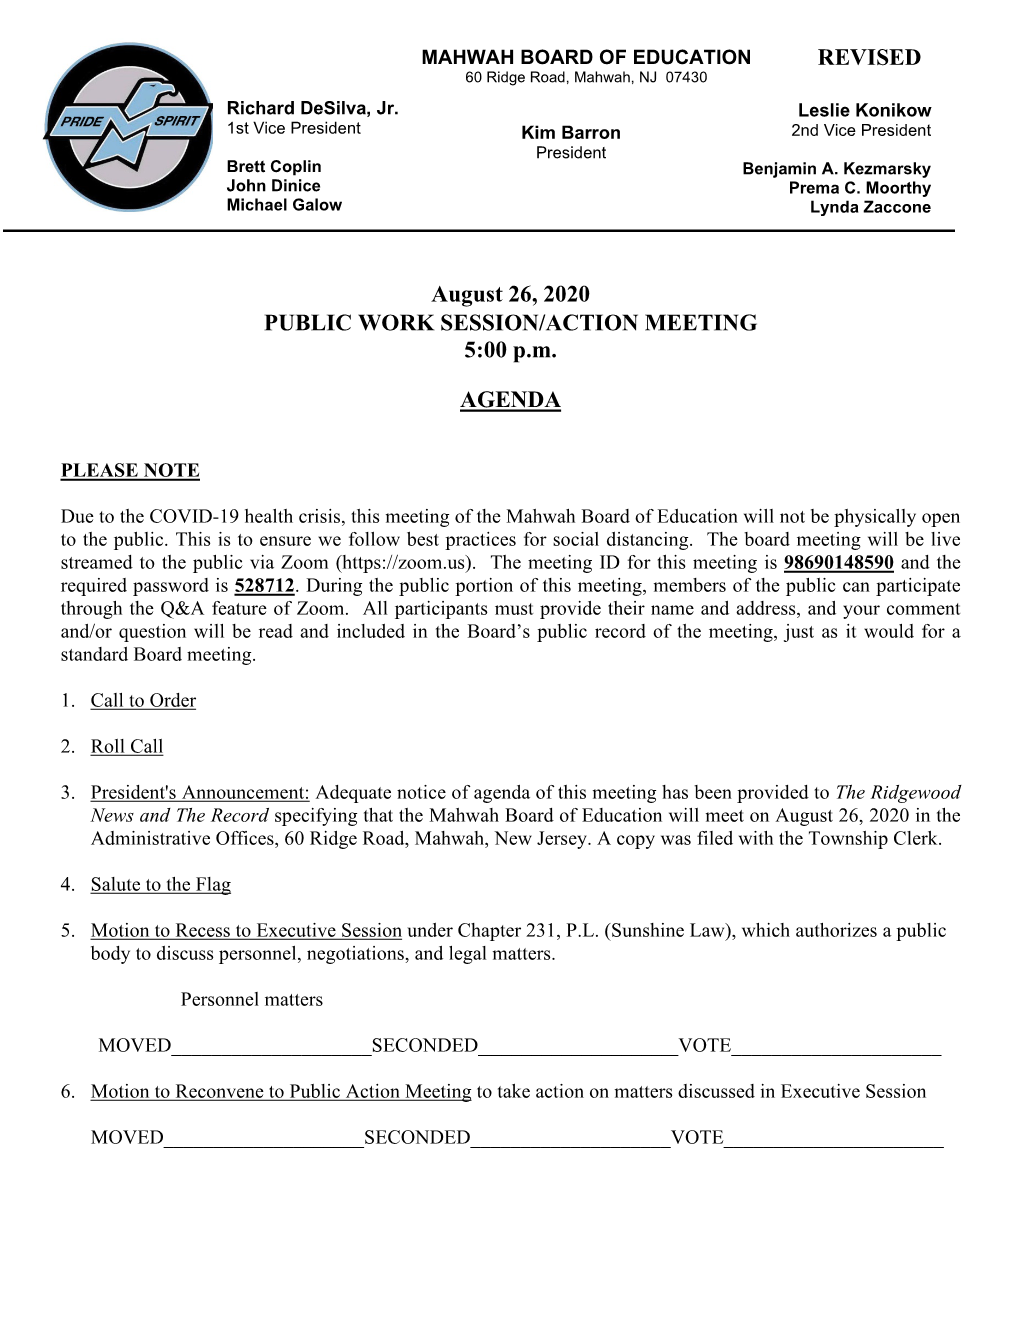 REVISED August 26, 2020 PUBLIC WORK SESSION/ACTION